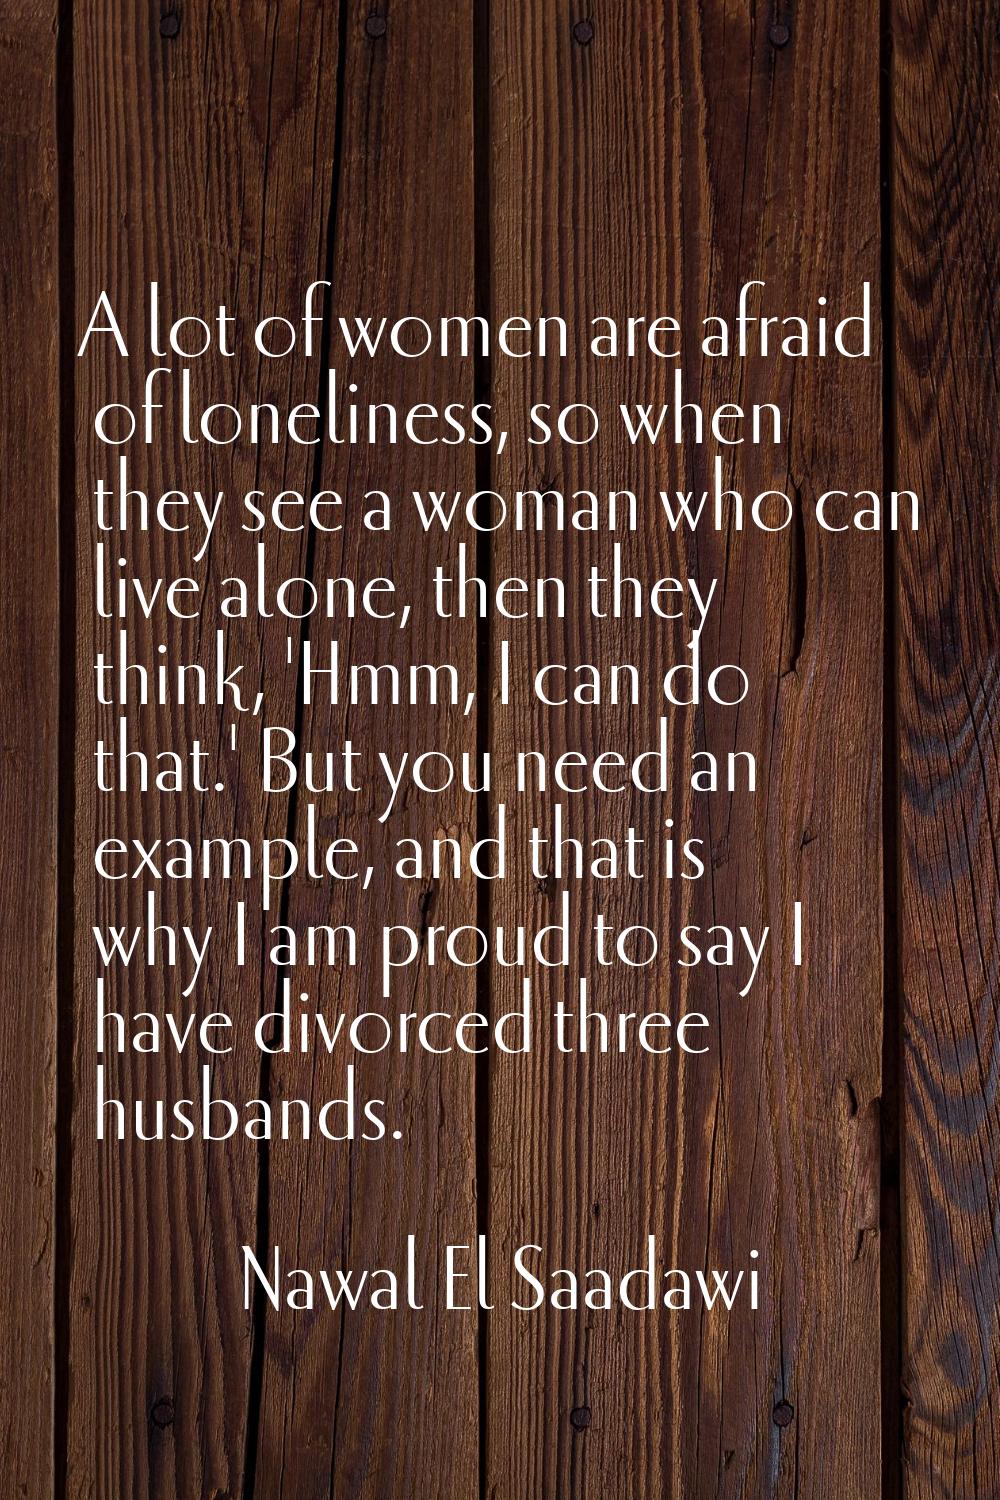 A lot of women are afraid of loneliness, so when they see a woman who can live alone, then they thi